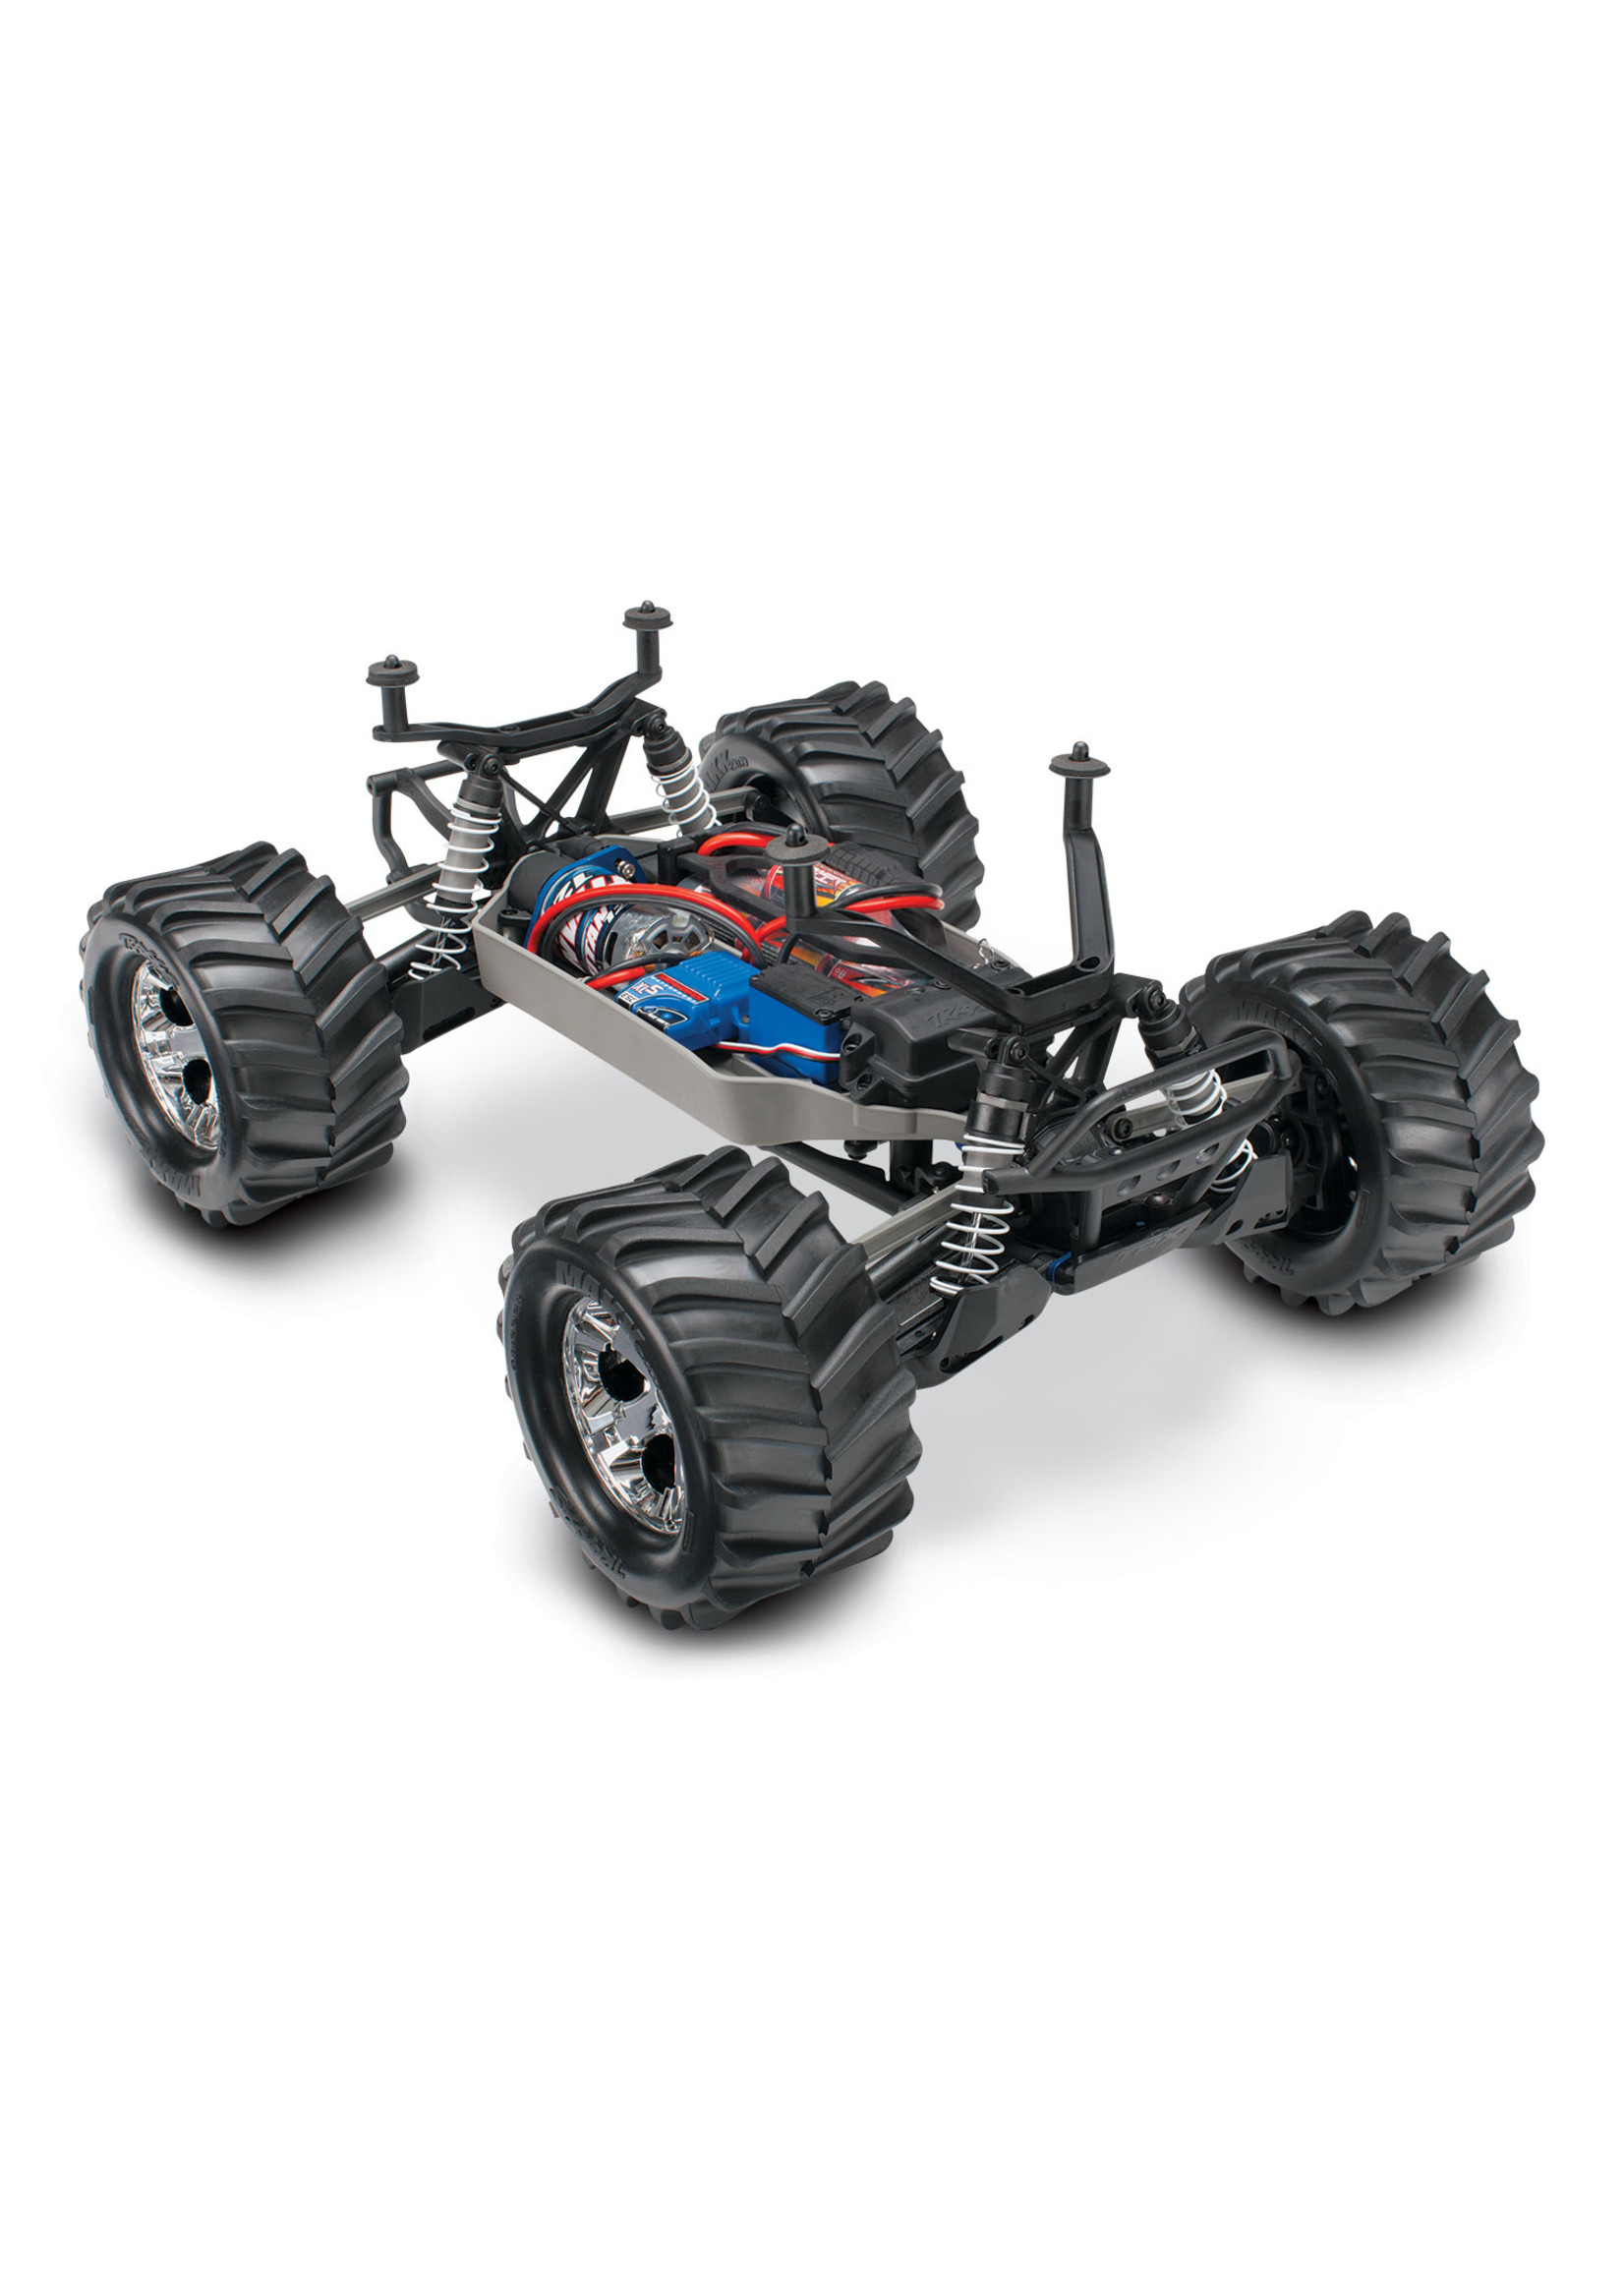 Traxxas 1/10 Stampede 4X4 RTR Brushed 4WD Monster Truck - Blue